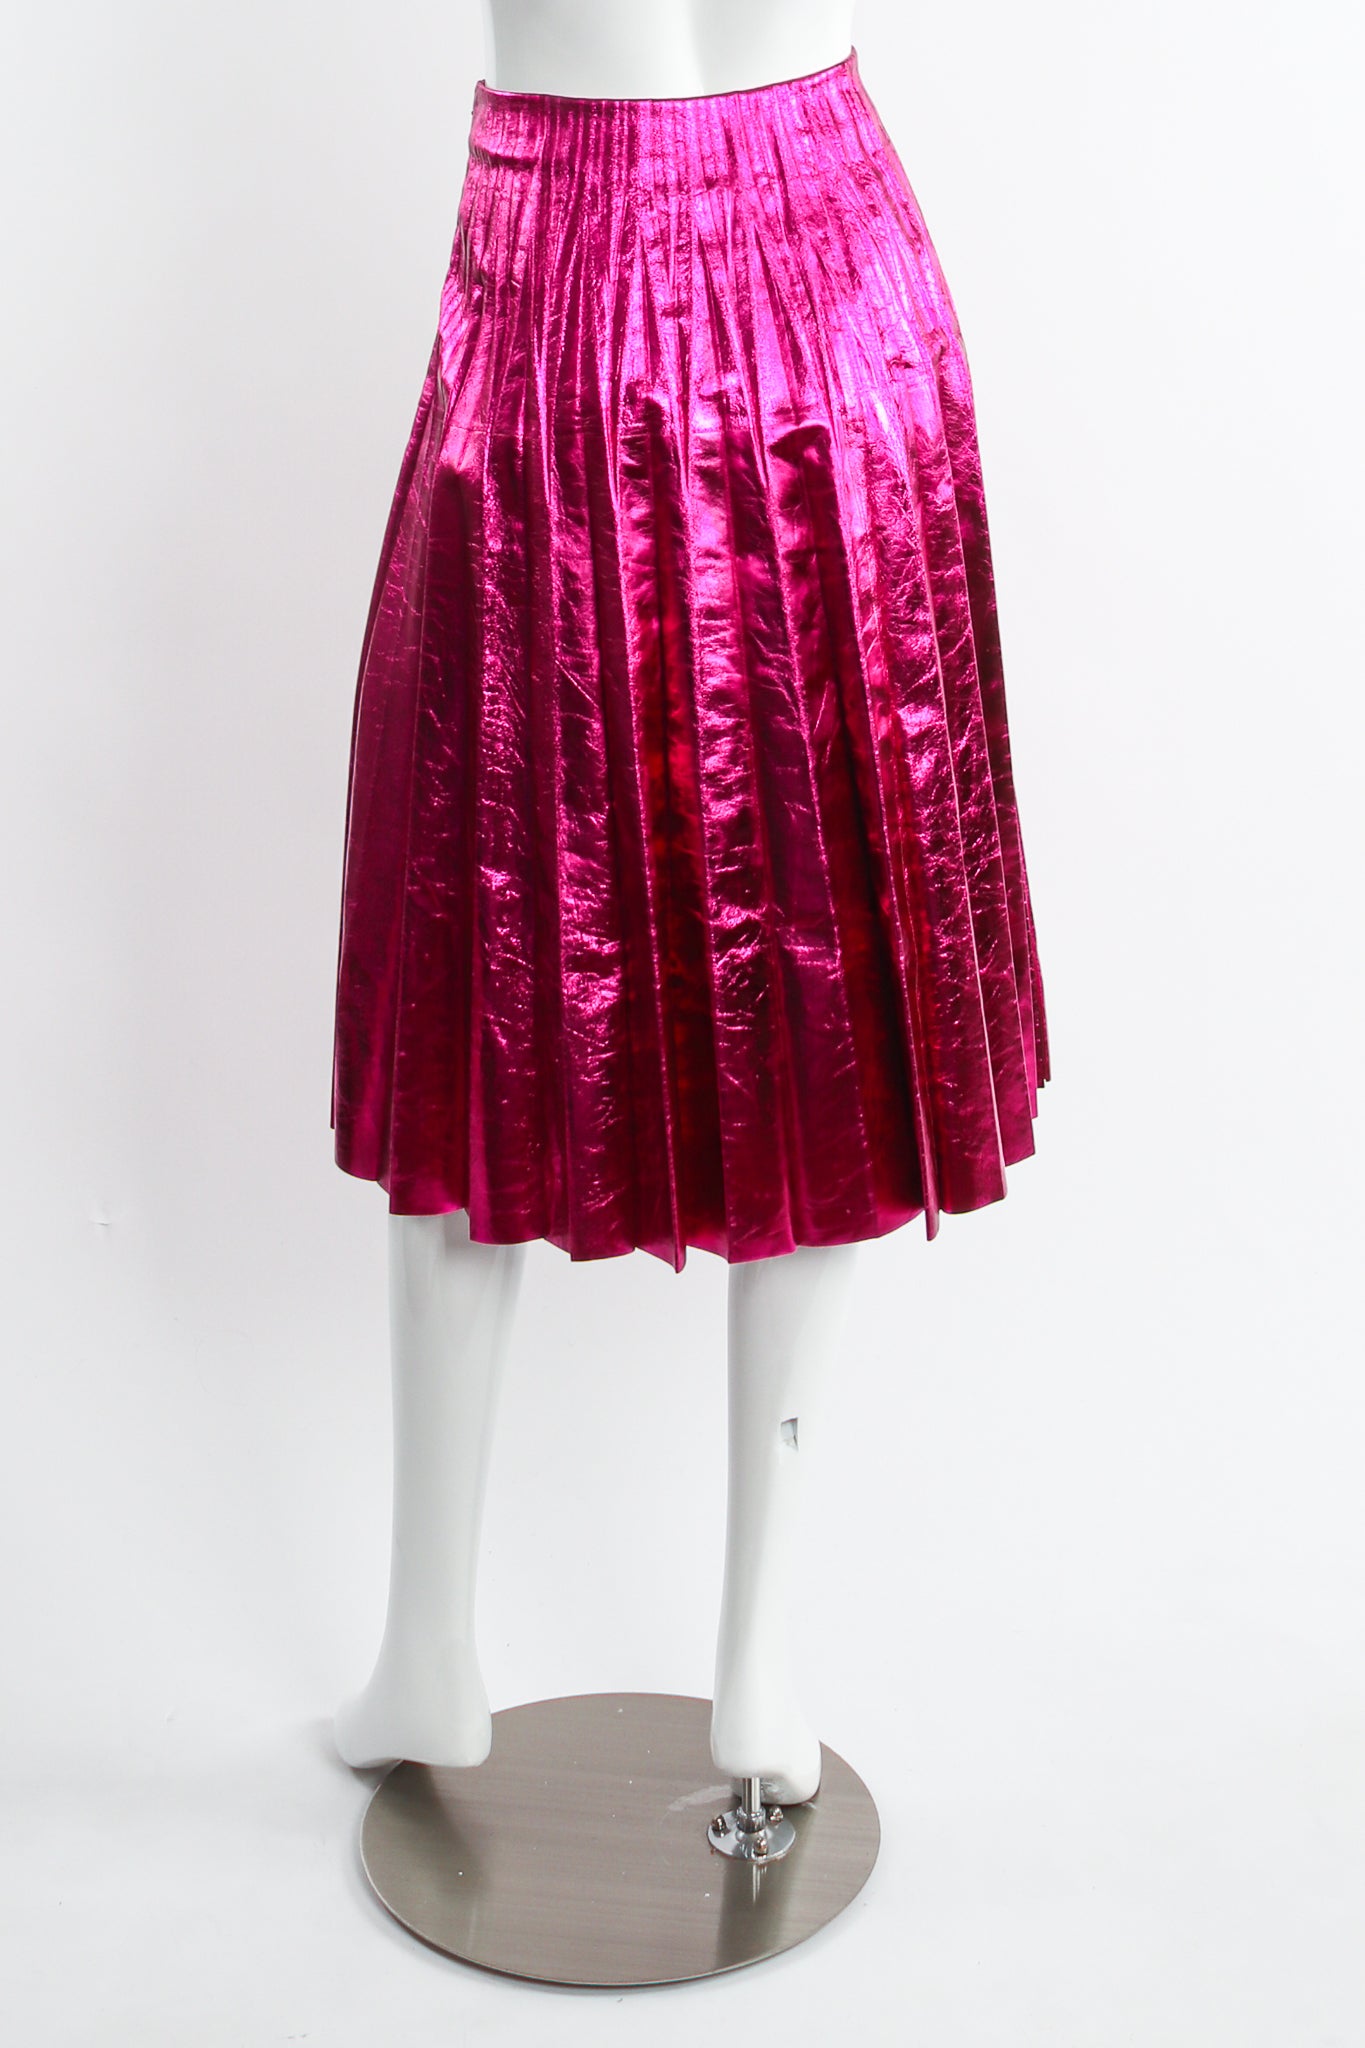 Gucci 2017 Metallic Plisse Pleated Leather Skirt in Fuchsia Rose on Mannequin back at Recess LA